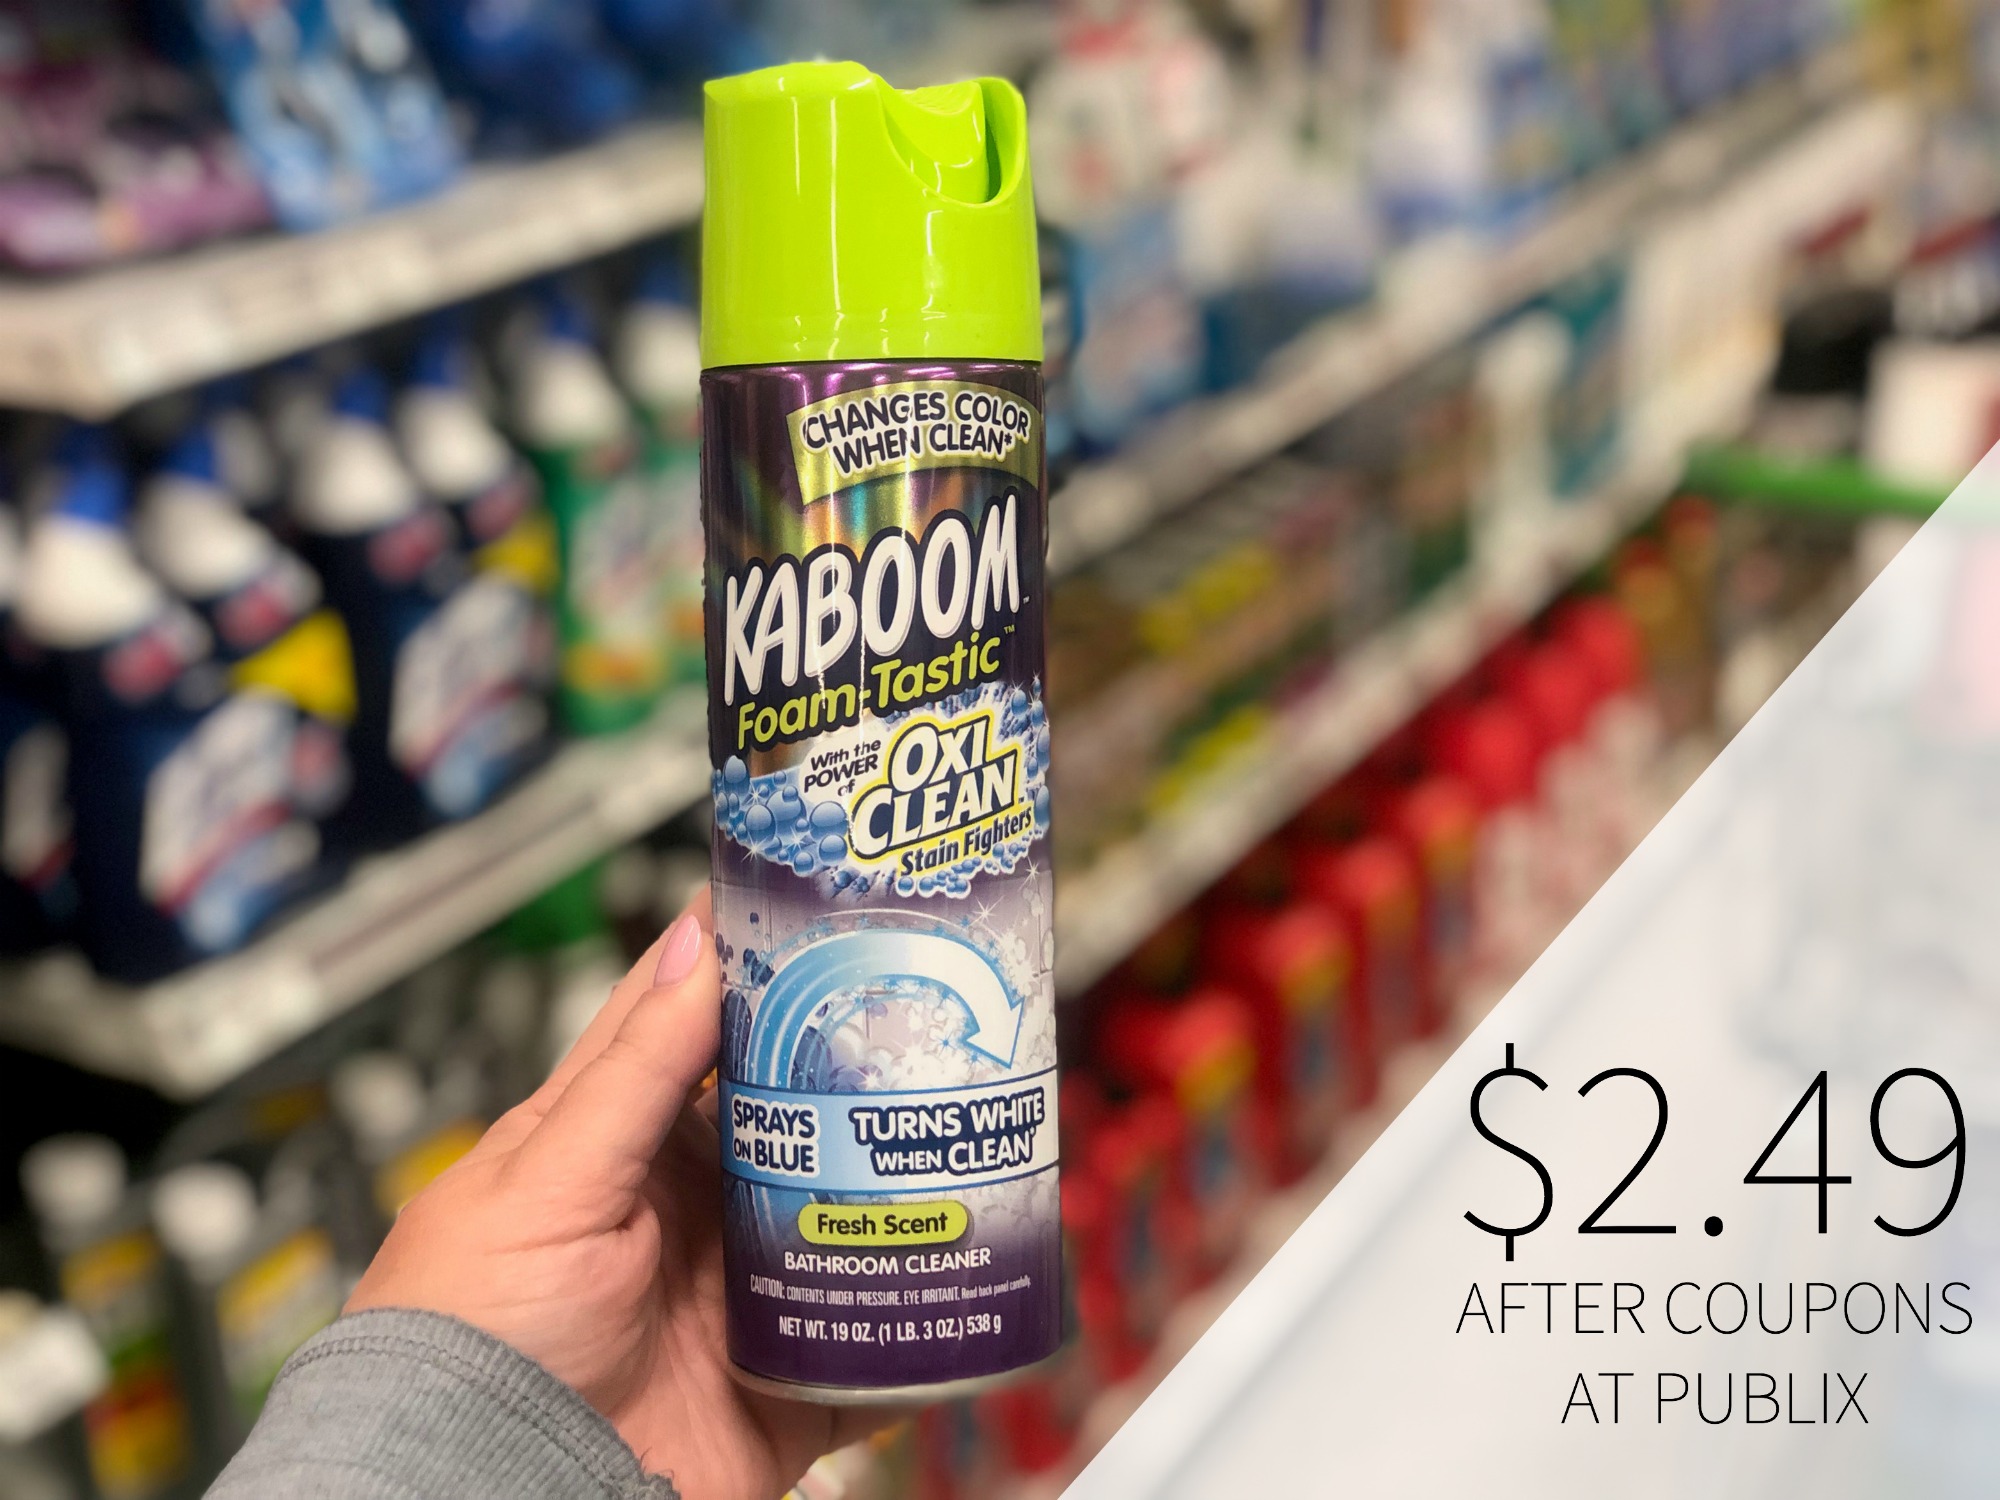 Save Big On KABOOM™ Products At Your Local Publix - New Publix Coupon! on I Heart Publix